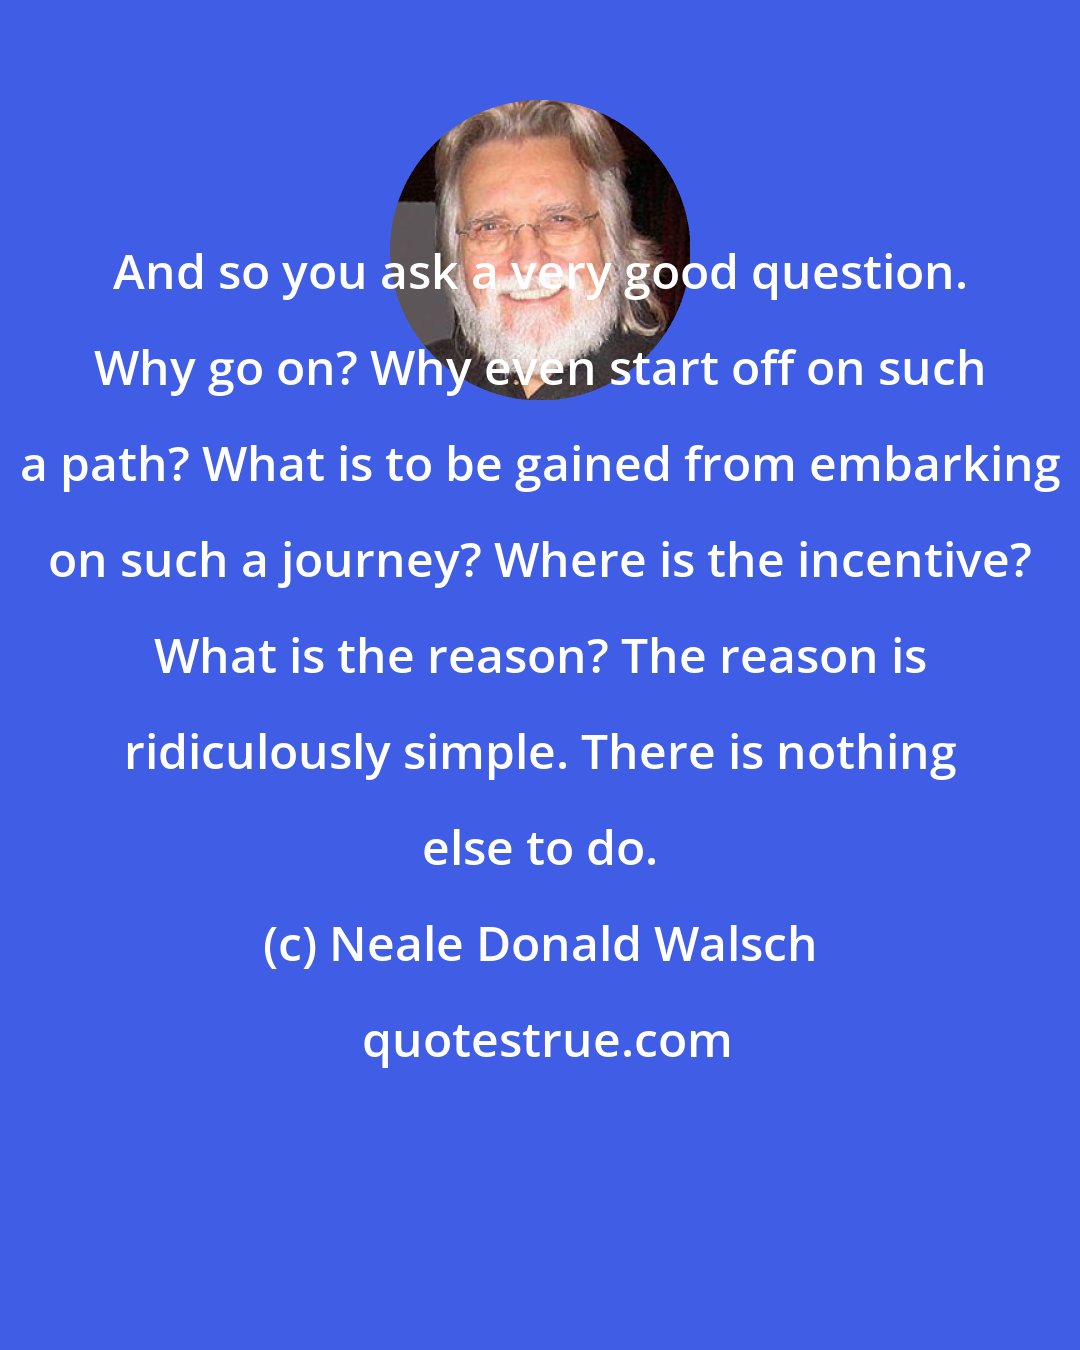 Neale Donald Walsch: And so you ask a very good question. Why go on? Why even start off on such a path? What is to be gained from embarking on such a journey? Where is the incentive? What is the reason? The reason is ridiculously simple. There is nothing else to do.